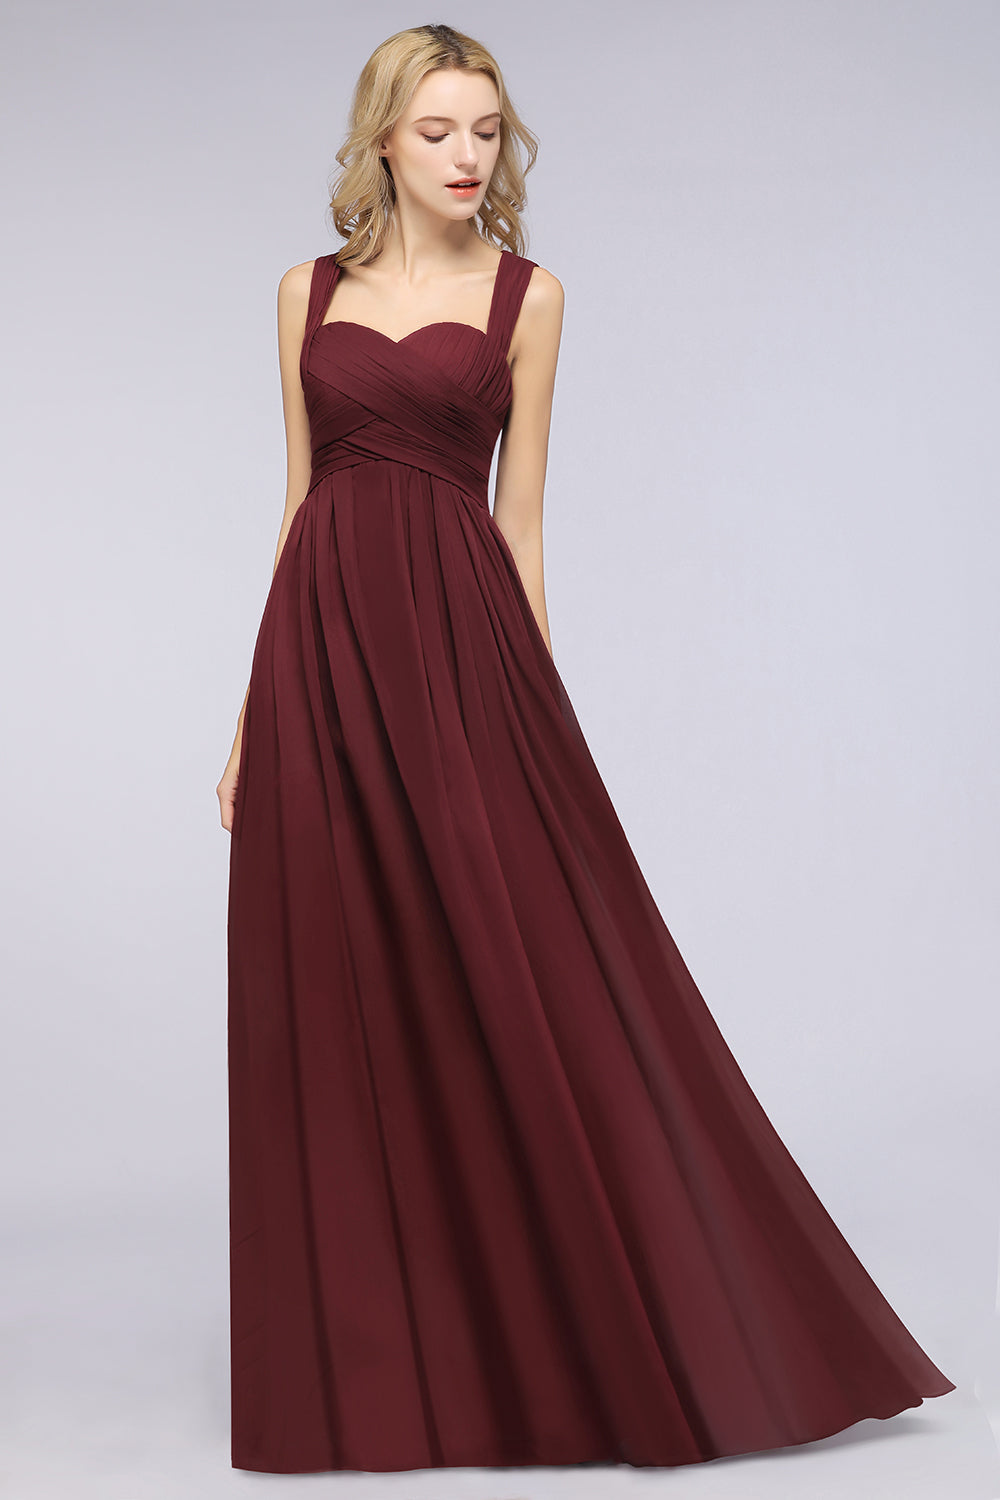 Chic Tiered Sweetheart Cap-Sleeves Bungurdy Bridesmaid Dresses